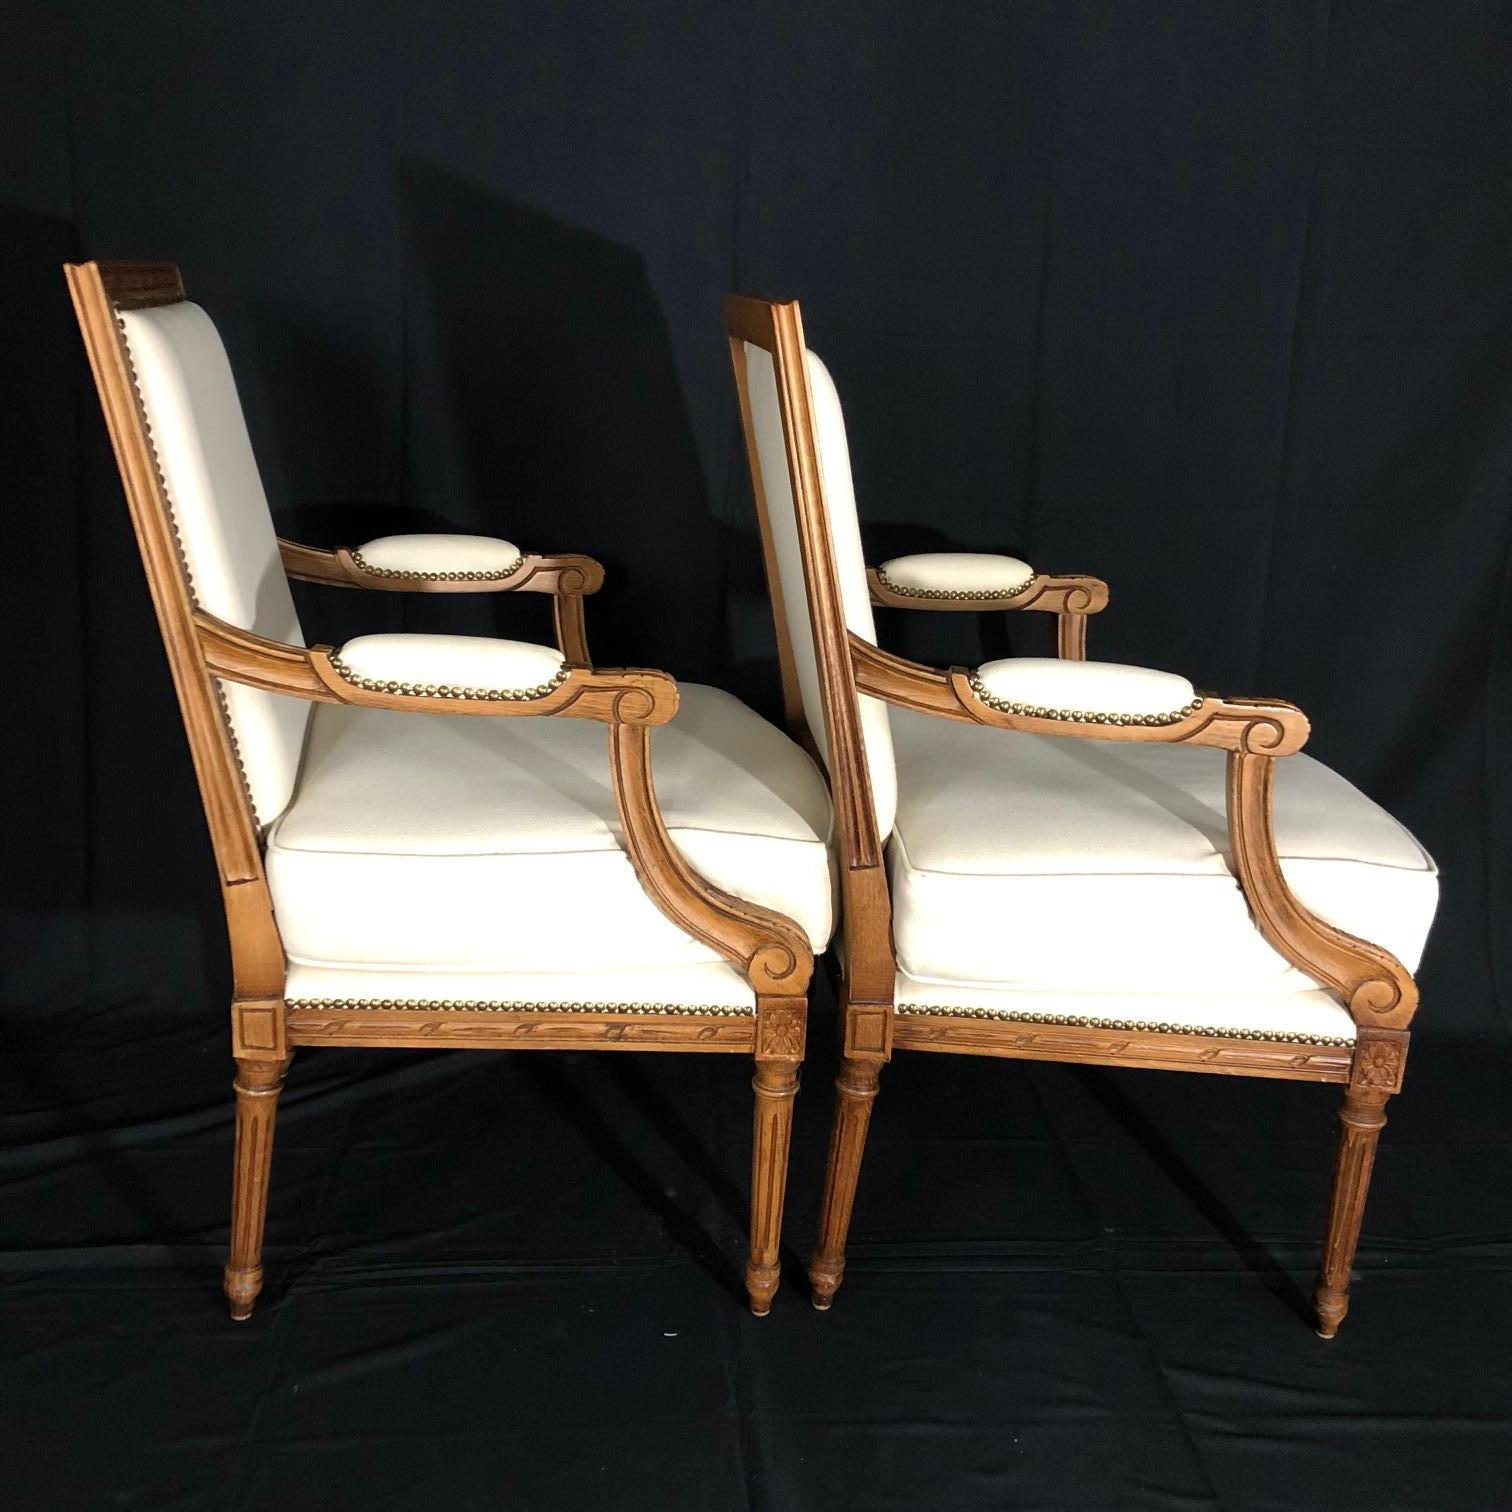 Mid-20th Century Superb Pair of Italian Carved Walnut Armchairs Bergeres with New Upholstery